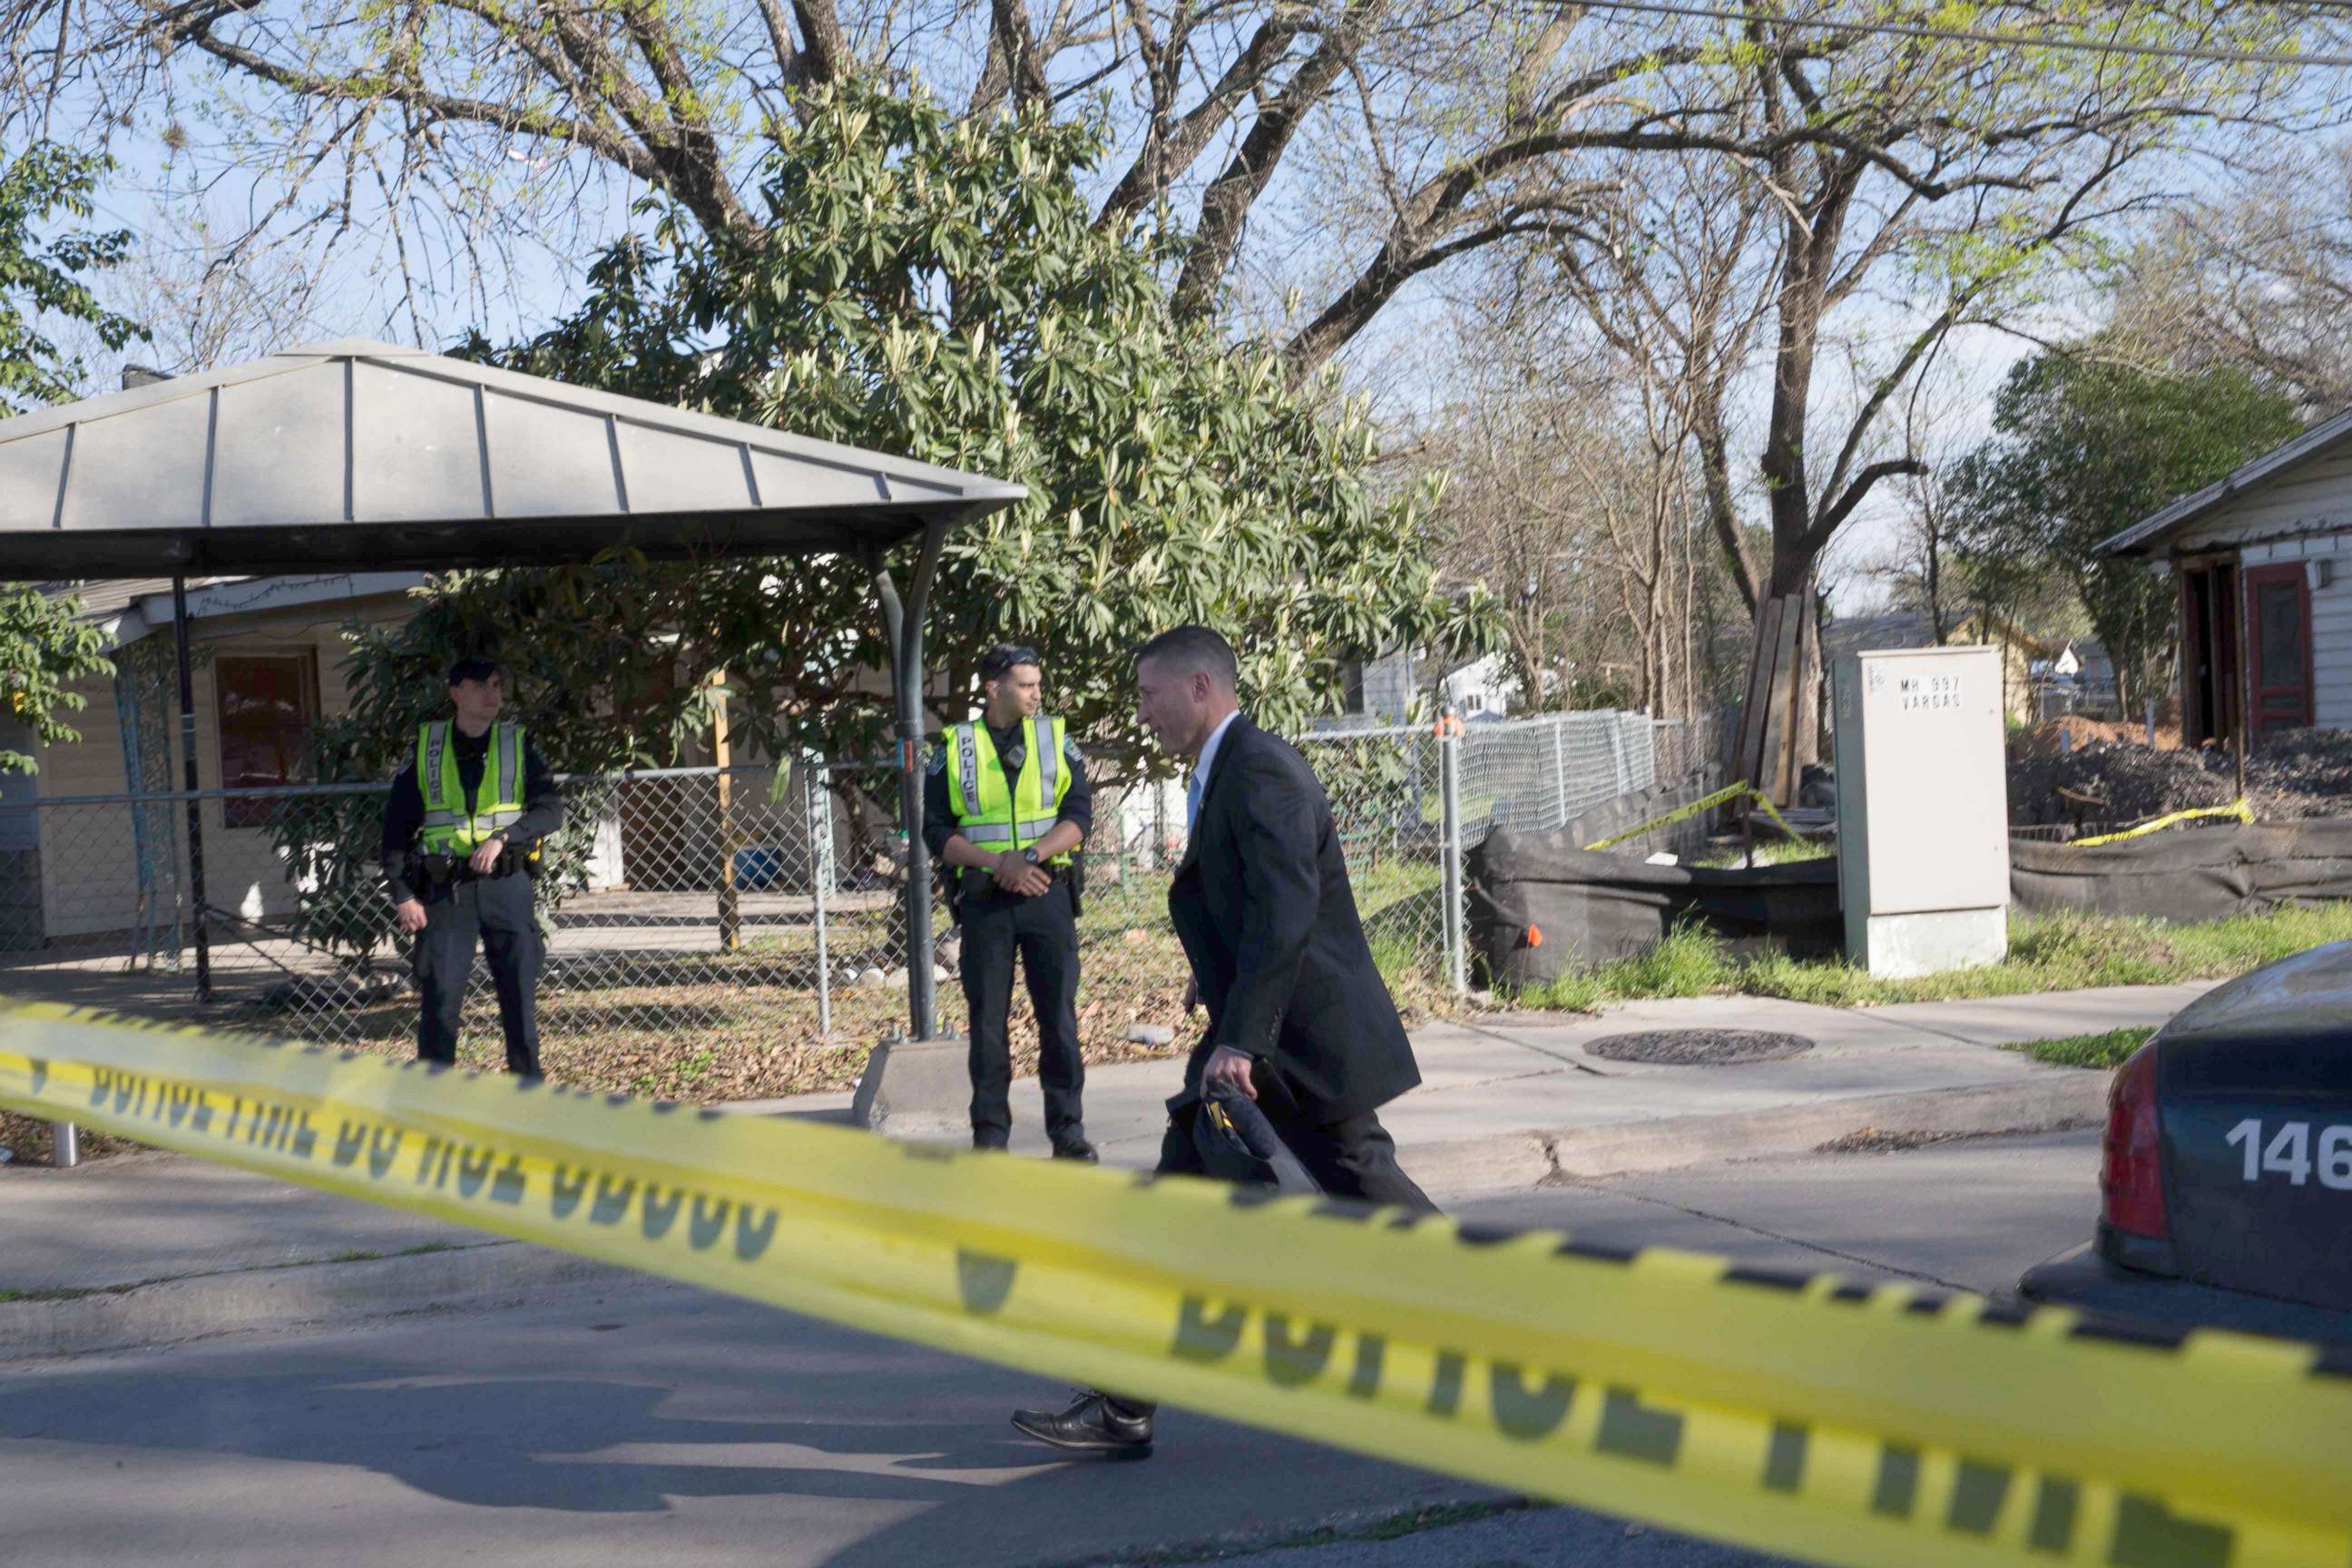 PHOTO: The scene near Galindo Street in Austin, Texas, March 12, 2018, where a woman in her 70's was injured in an explosion.